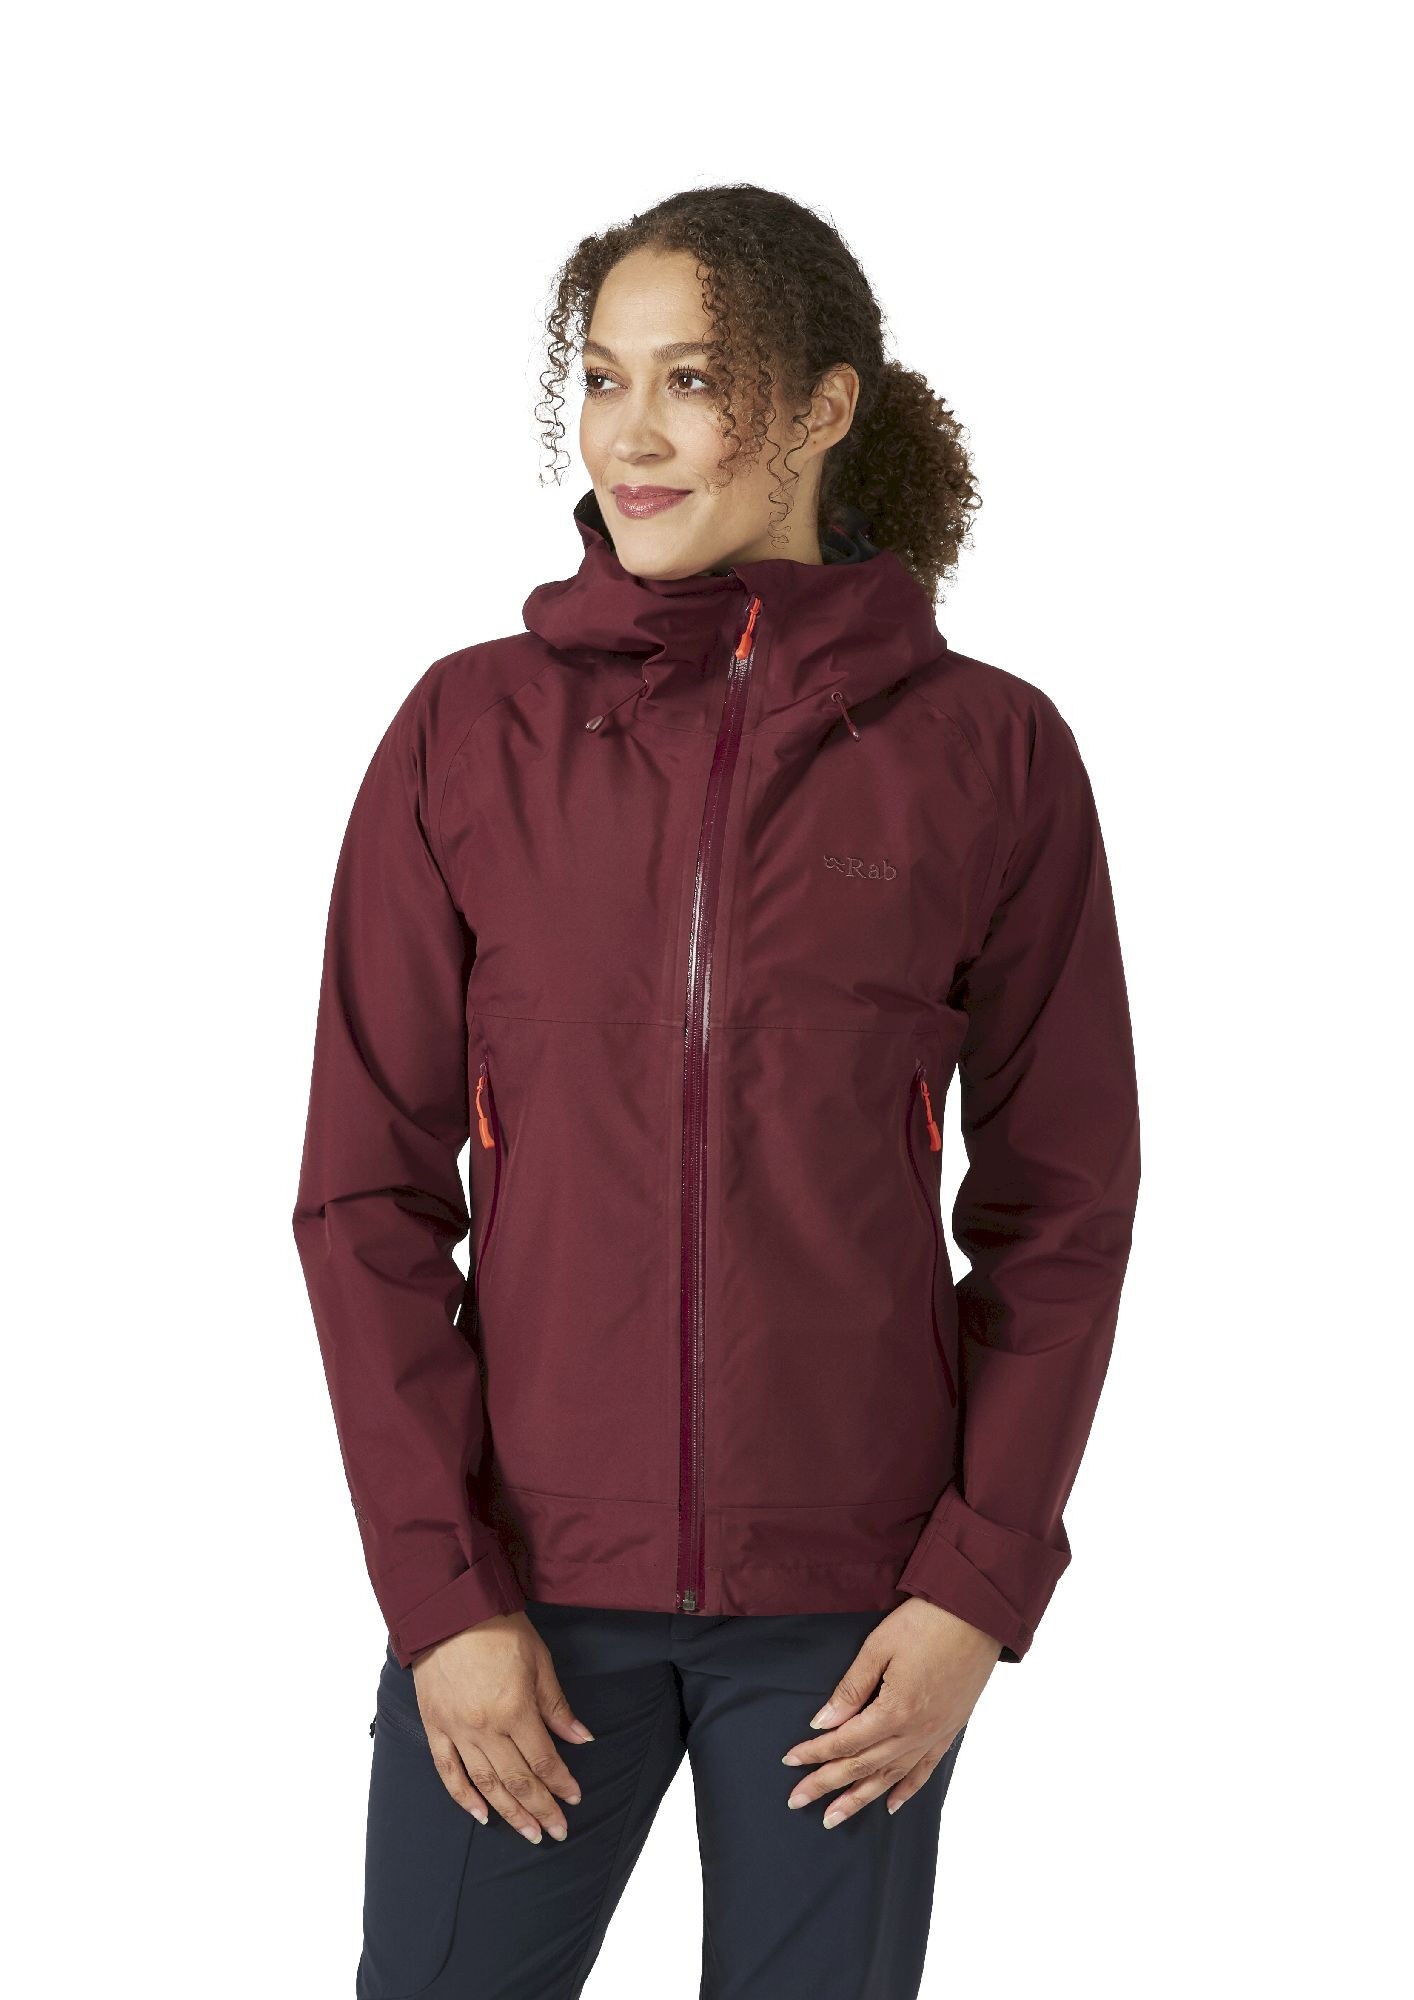 Rab Women's Namche Paclite Jacket - Chaqueta impermeable - Mujer | Hardloop